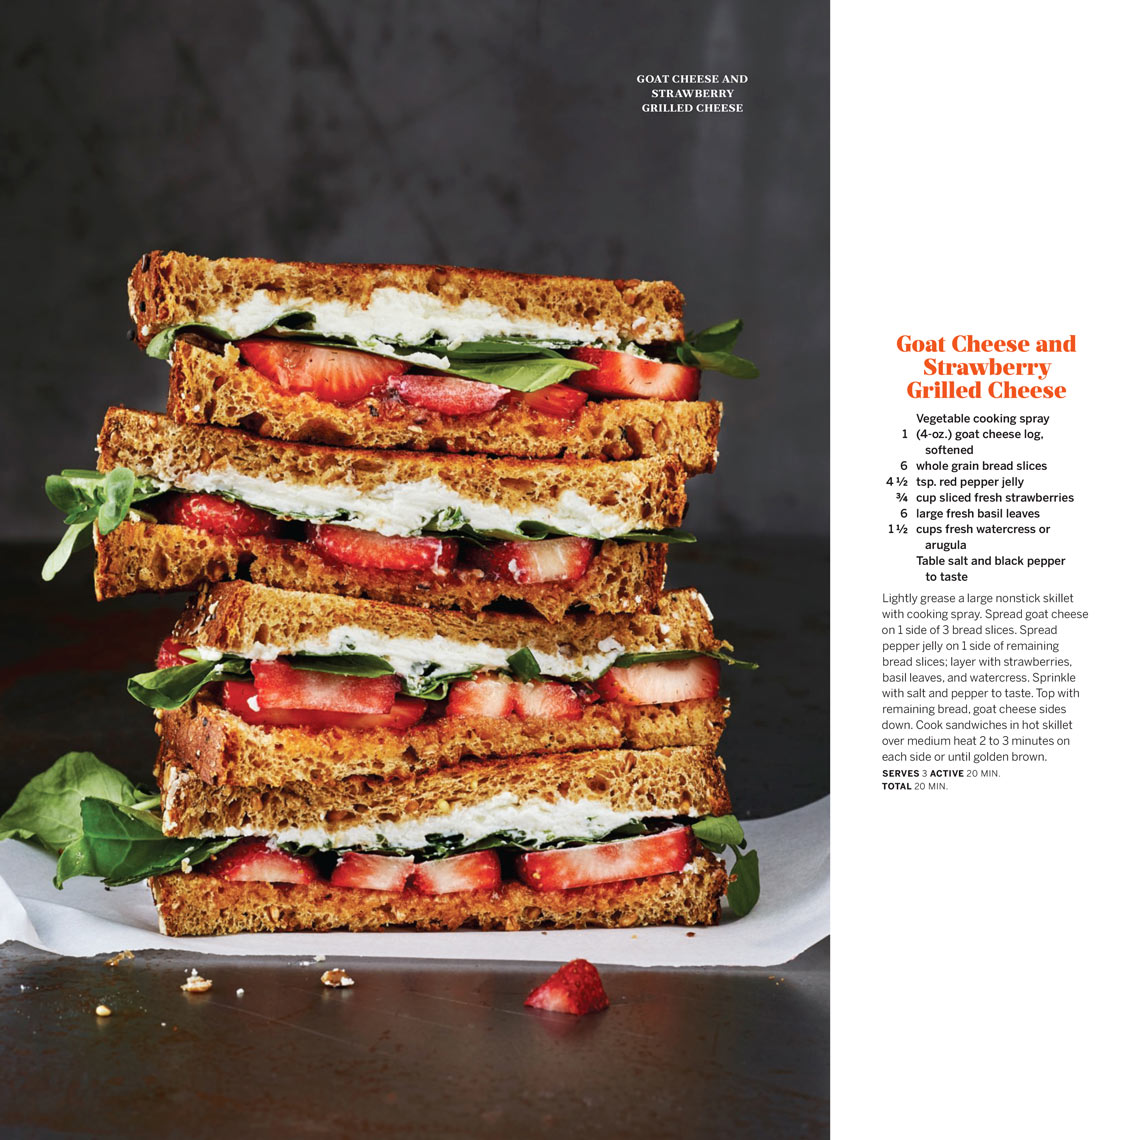 Goat-Cheese-and-Strawberry-Grilled-Cheese-copy